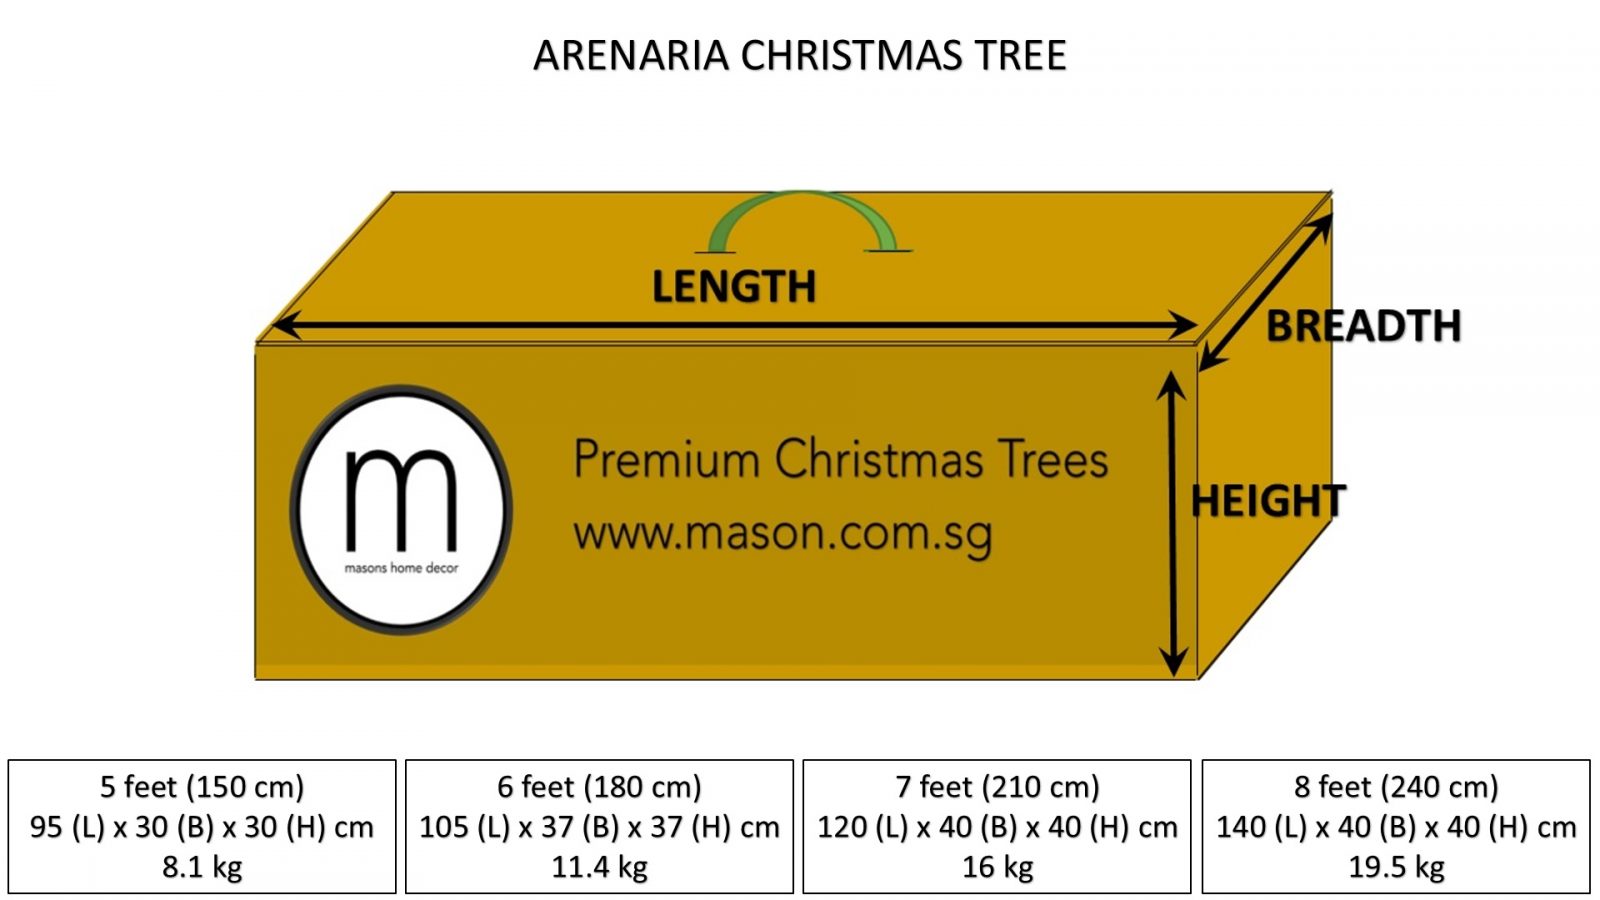 arenaria christmas tree dimensions and weight